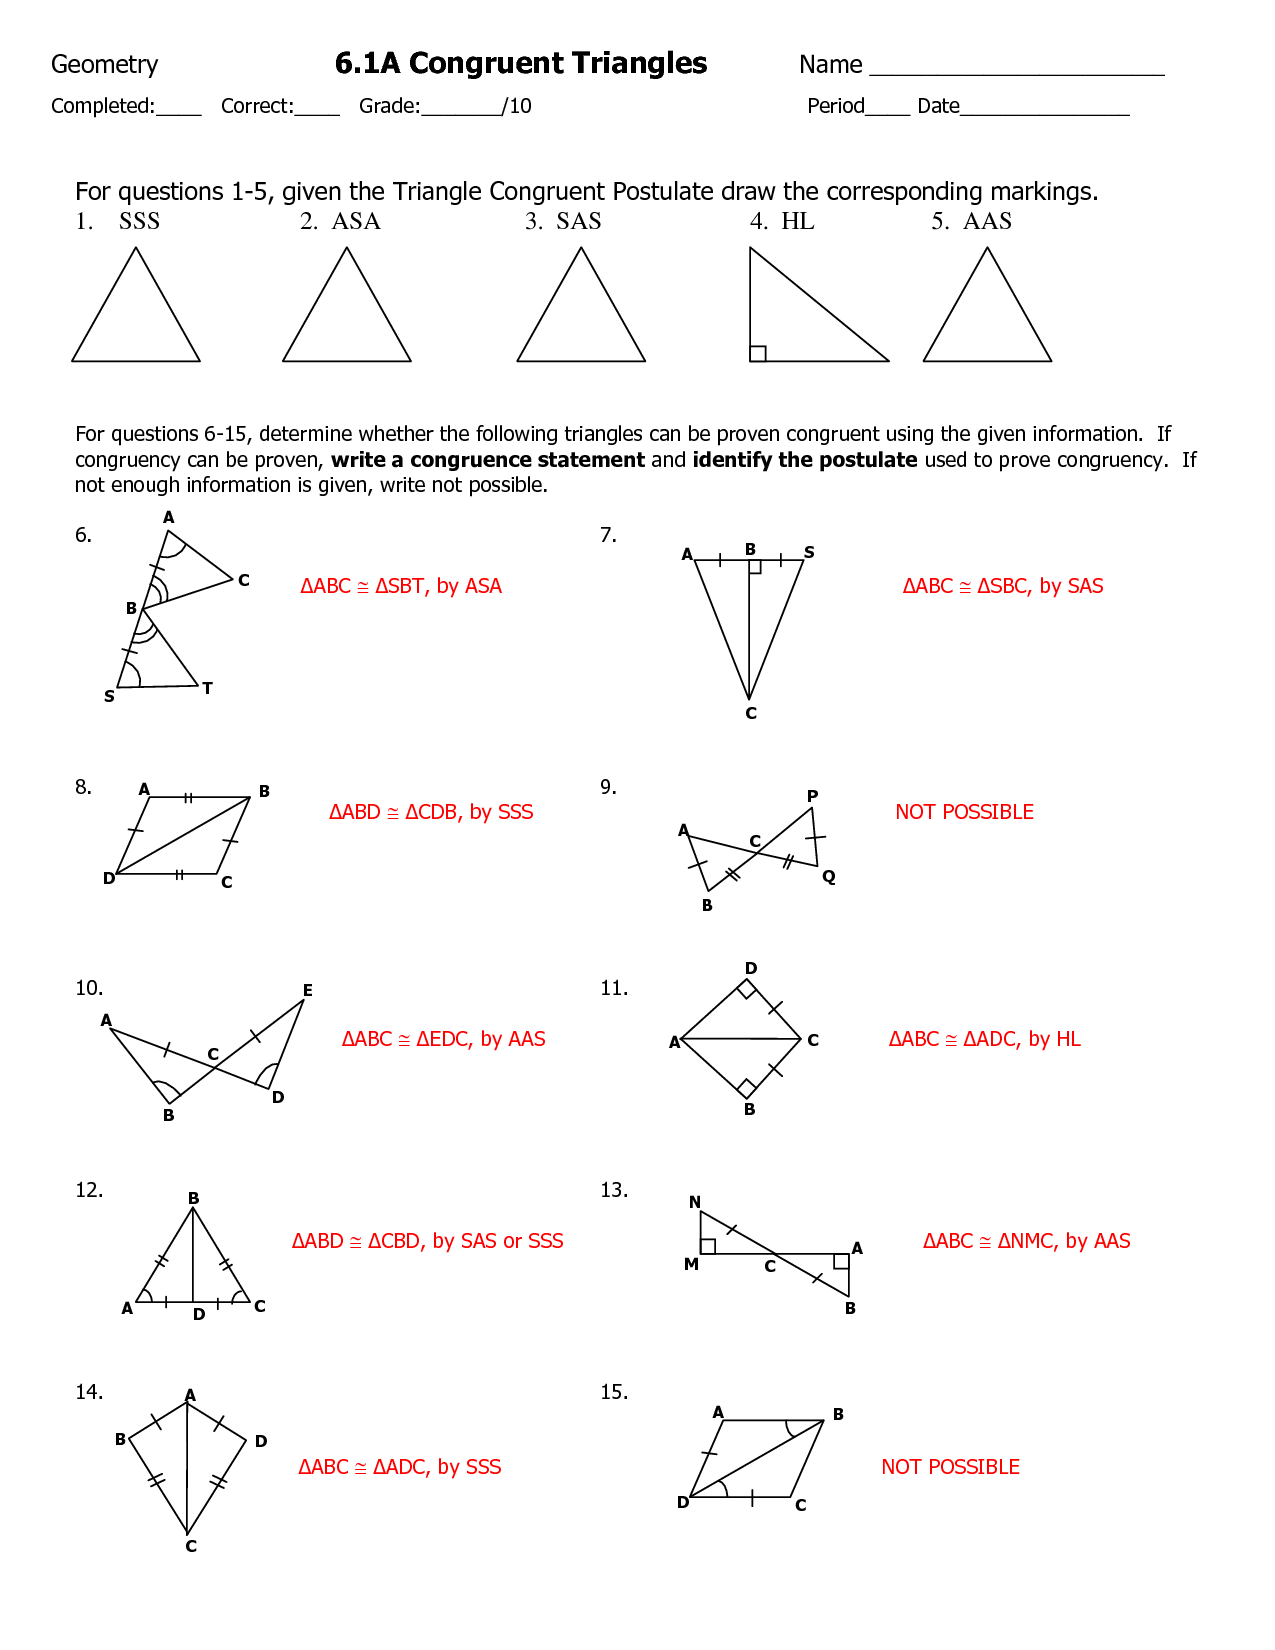 Congruent Triangles Worksheet With Answers  geometry worksheets for practice and studyproving 